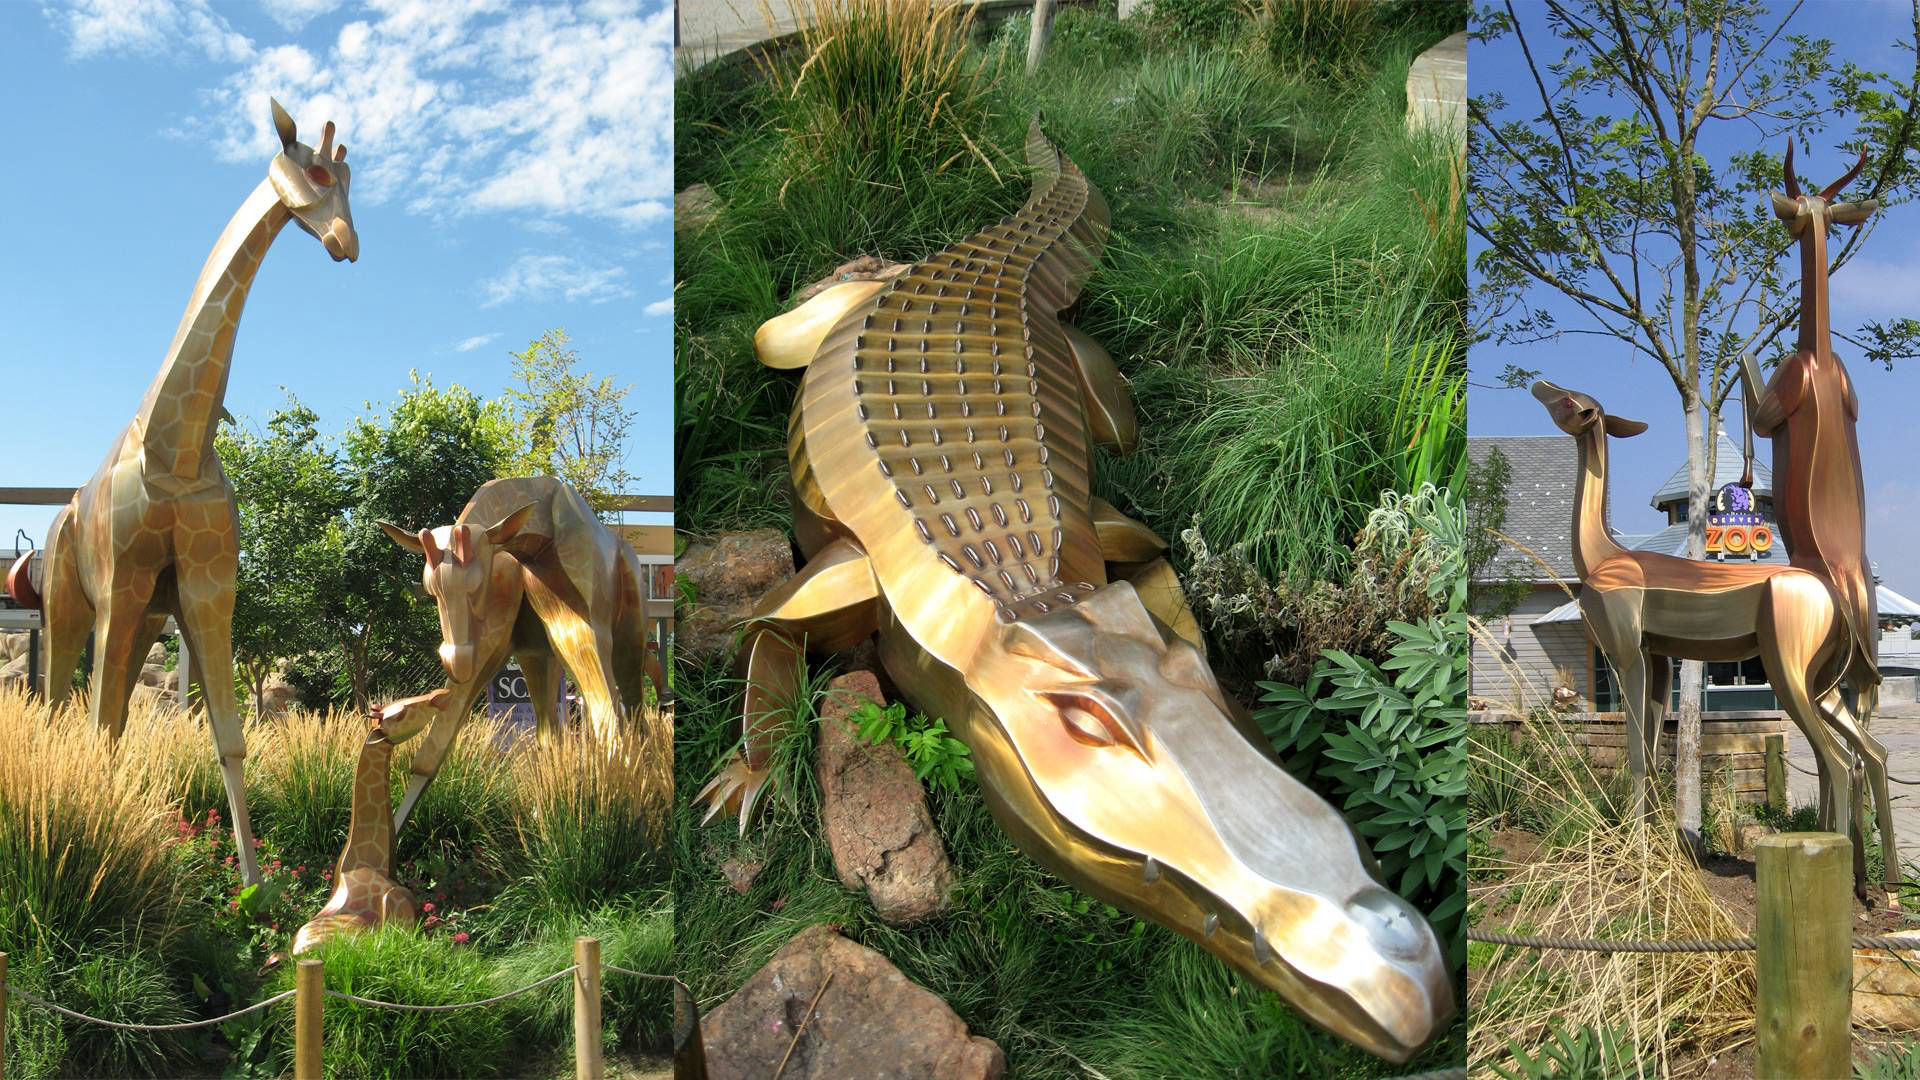 Stainless steel with patina animals for Denver Zoo - public art sculpture by Heath Satow in Denver, CO